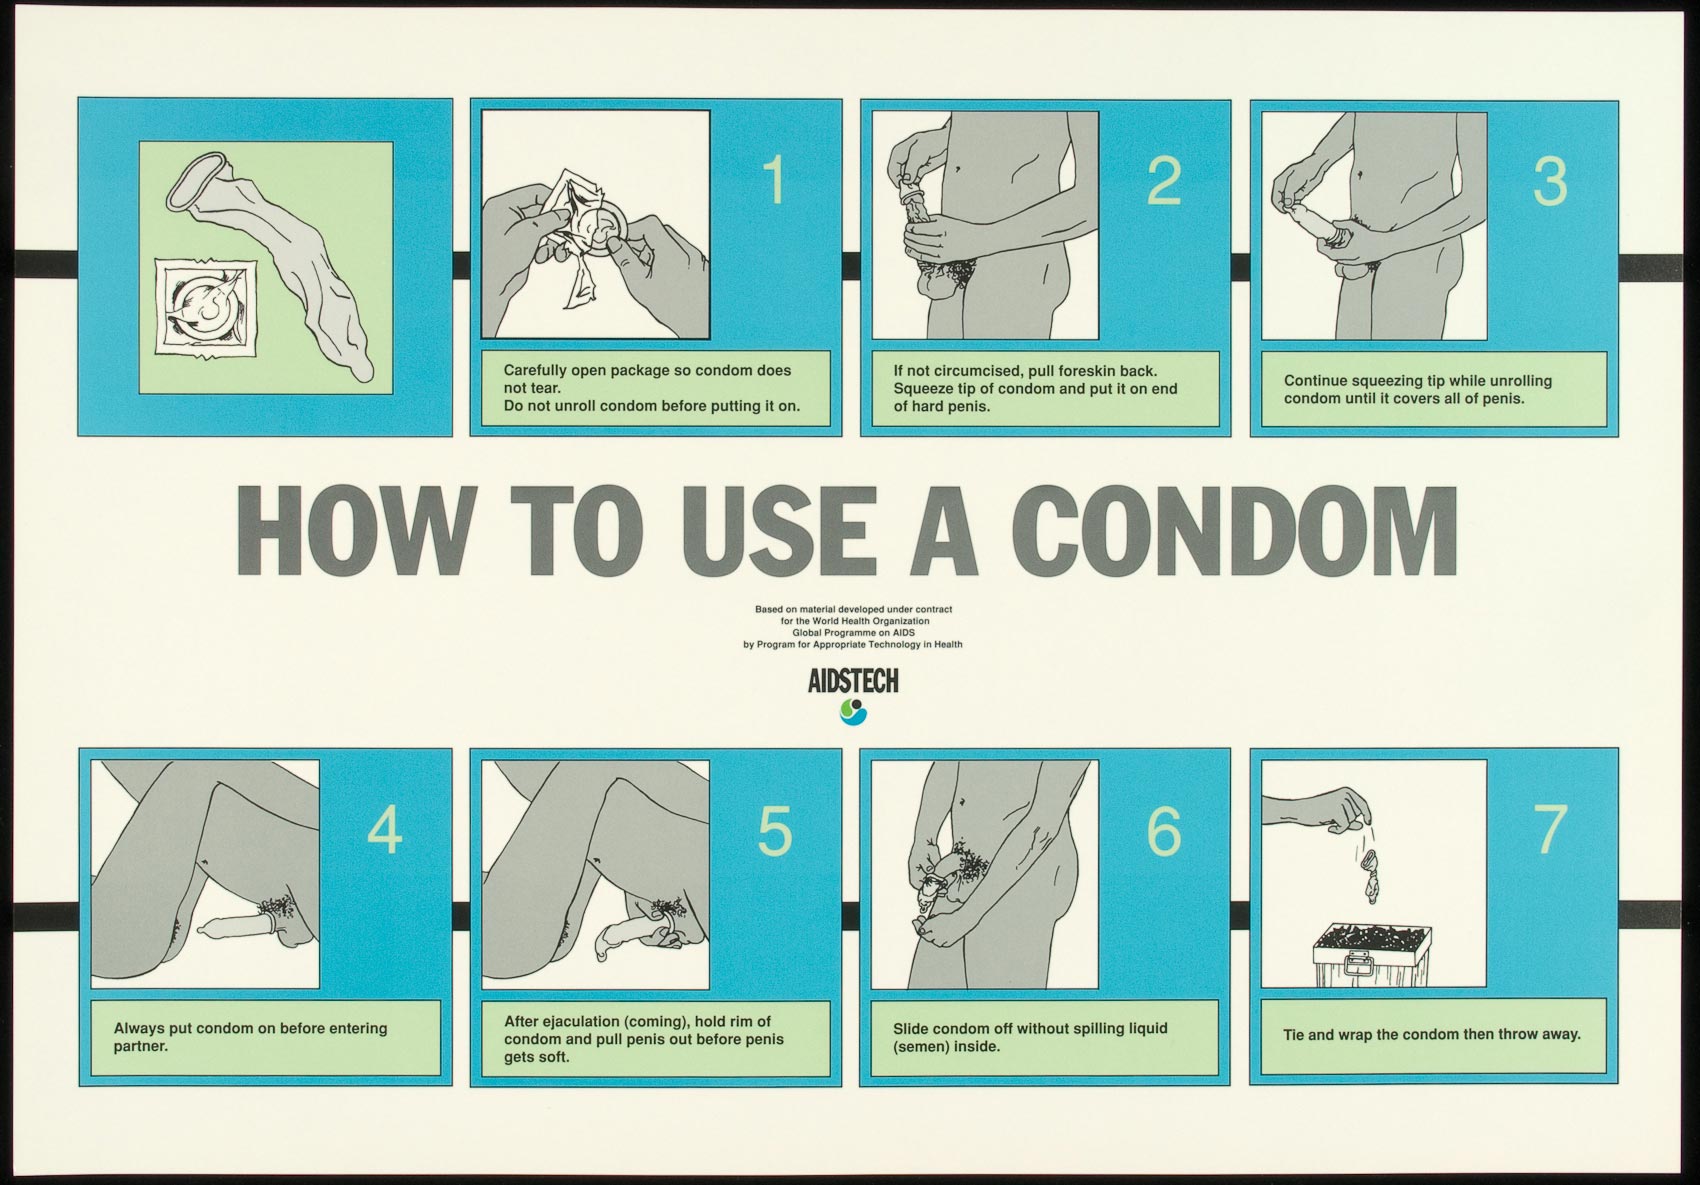 Condom pull out